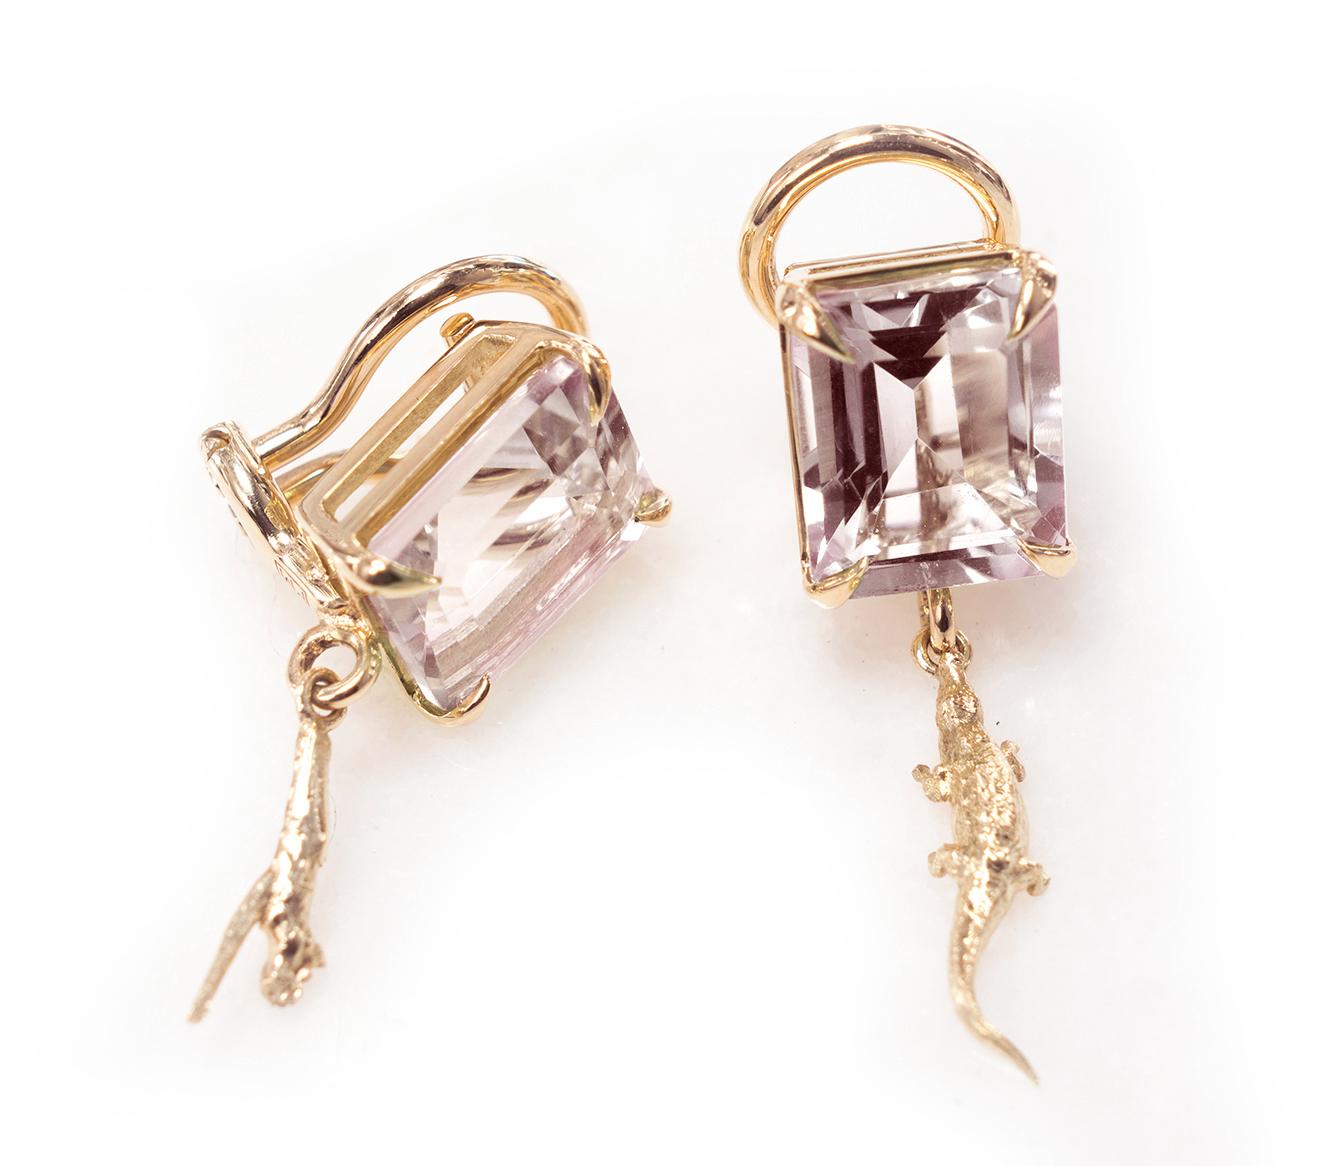 These contemporary Mesopotamia clip-on earrings with morganites (9x7 mm each, octagon cut) belong to Tea collection, which was featured in Vogue UA published issue. These earrings are made of 18 karat rose gold and designed by the oil painter from